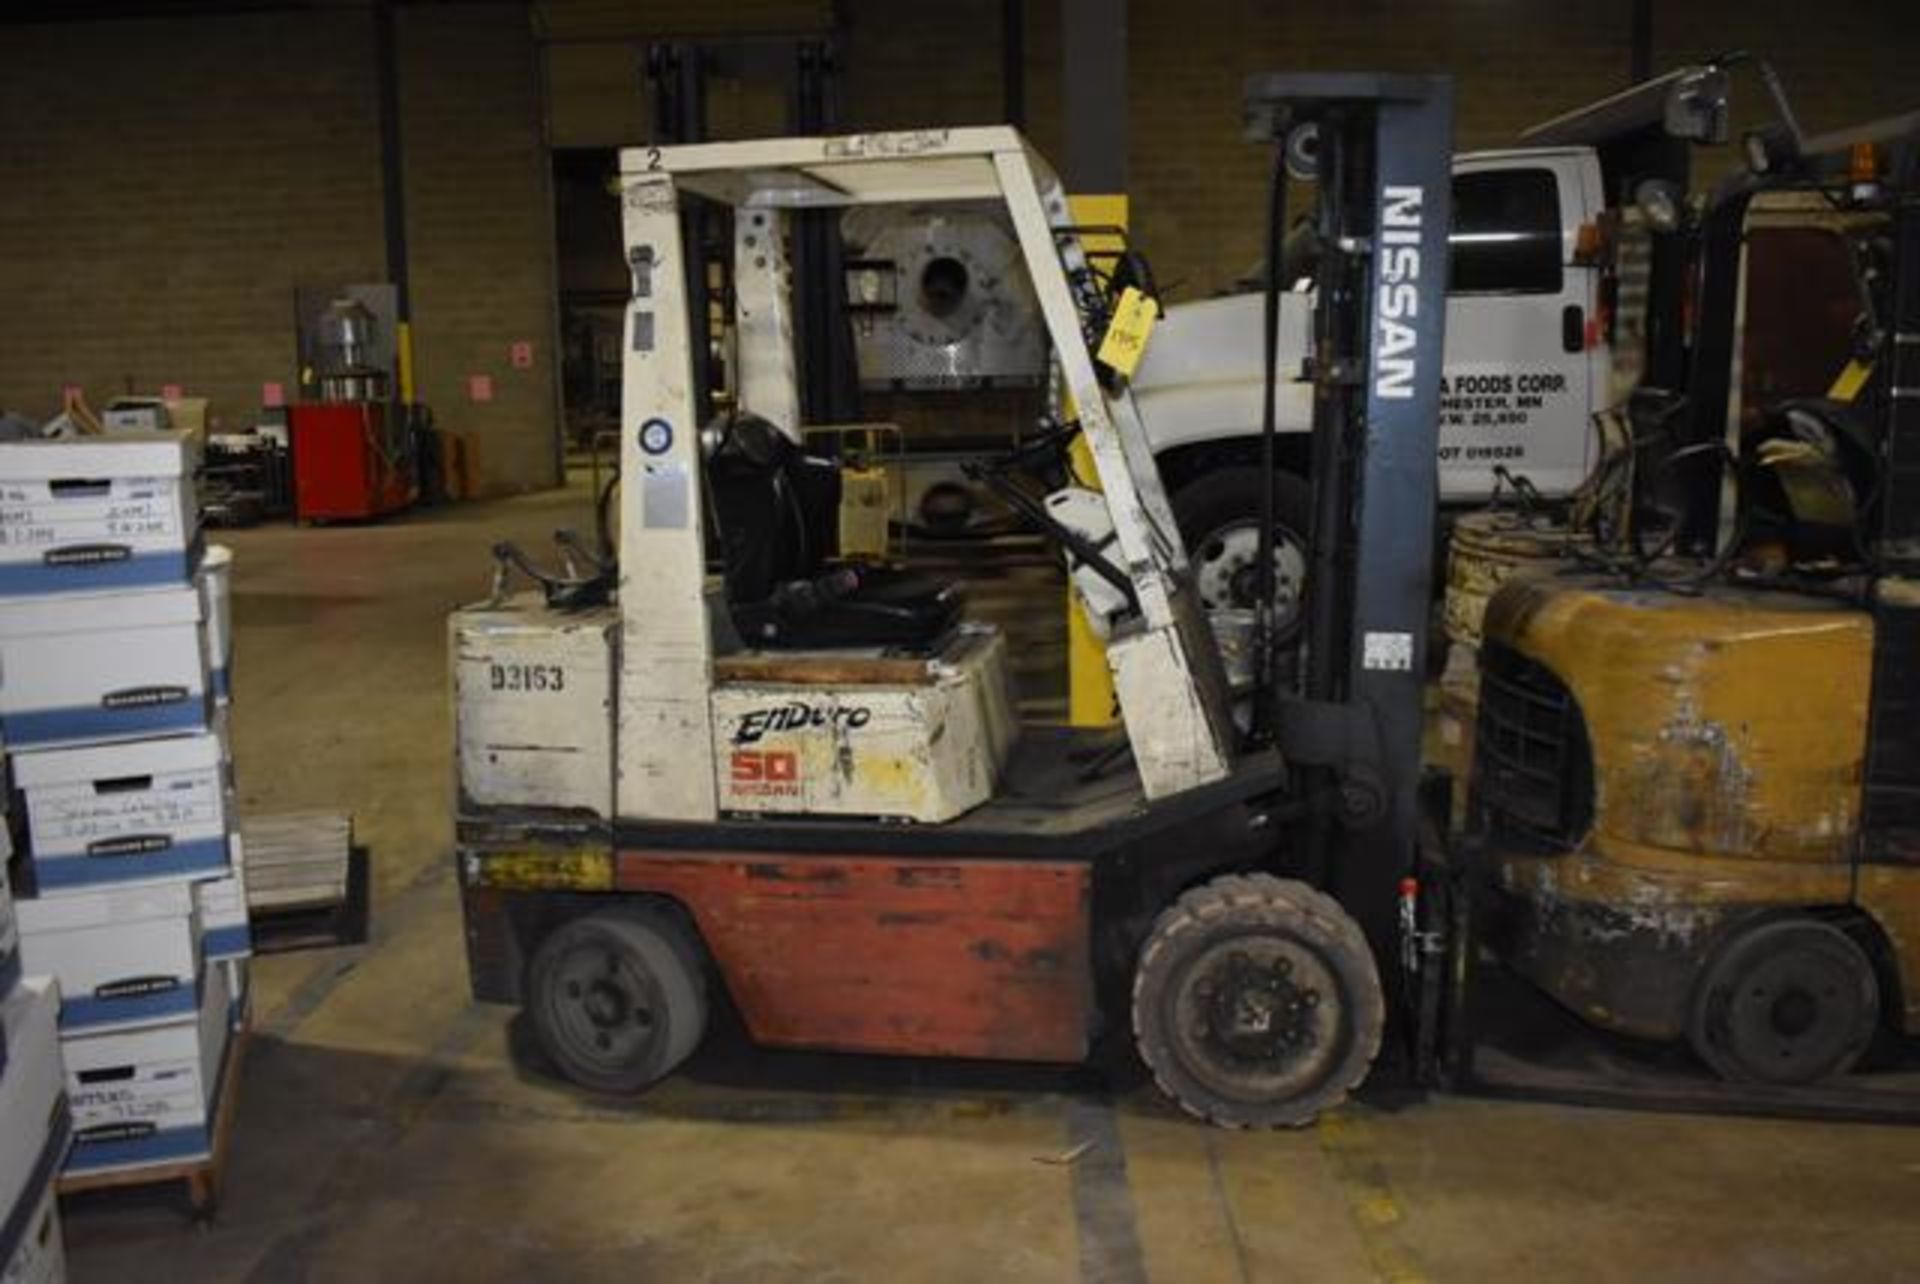 (Located in Rochester, MN) Nissan Enduro 50 Forklift, Propane, Cushion Tires, Side Shift, ROPS - Image 2 of 3